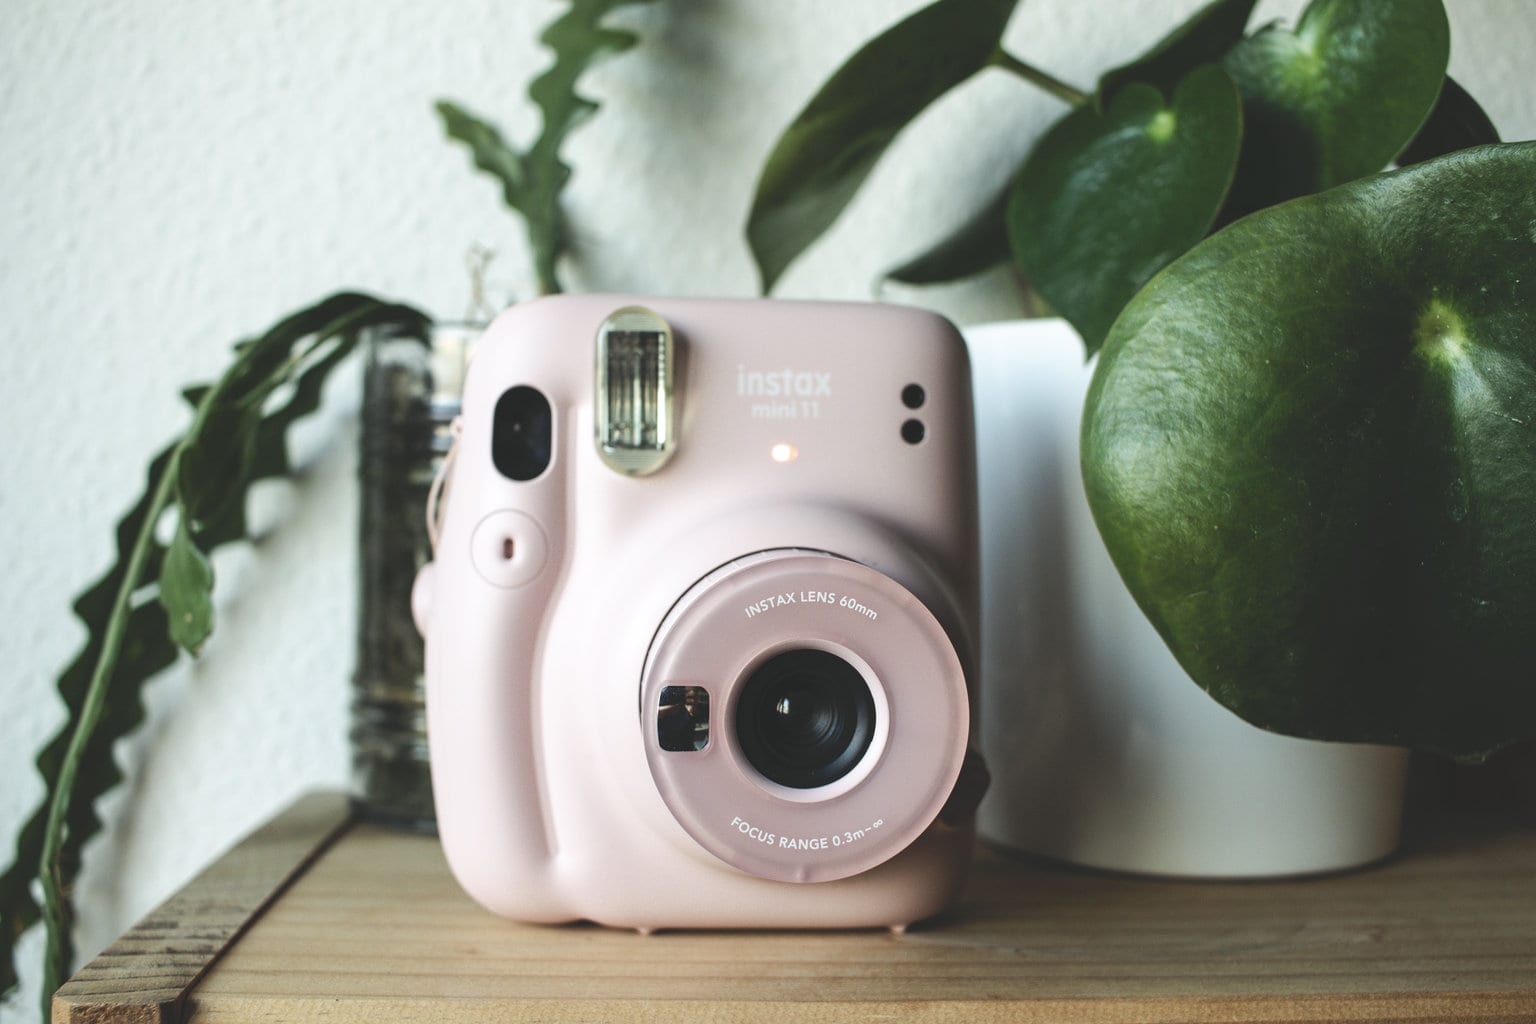 INSTAX MINI 11: THE GIFT YOU DESERVE